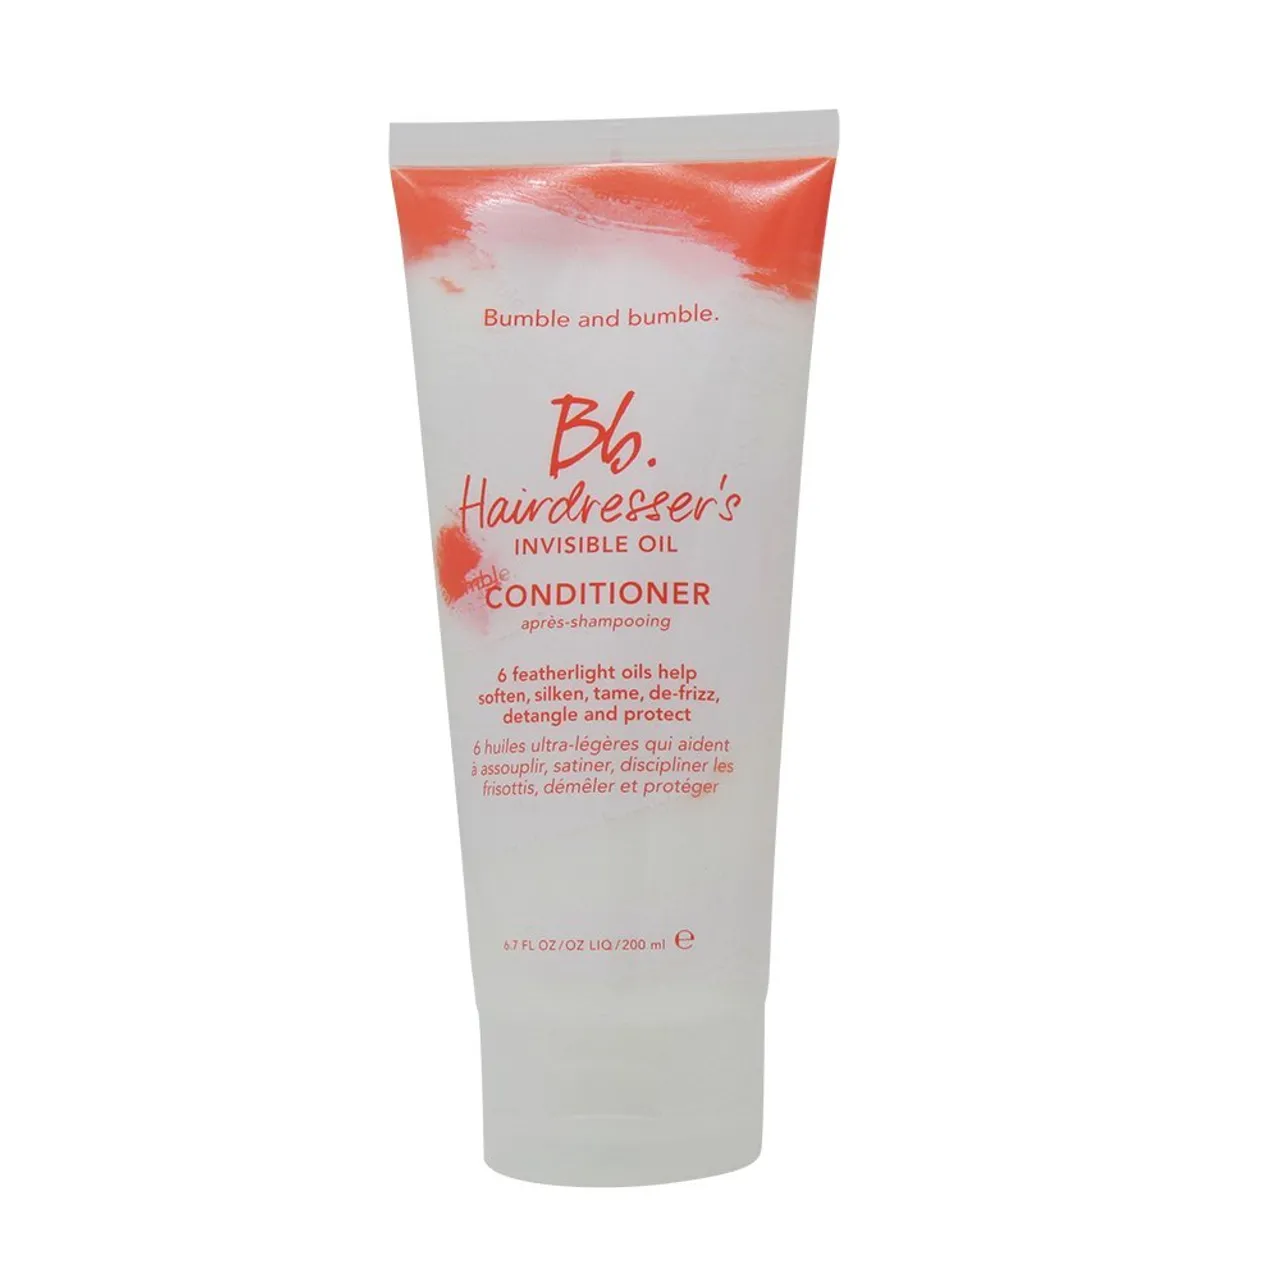 Bumble and bumble Conditioner Hairdresser's Invisible Oil